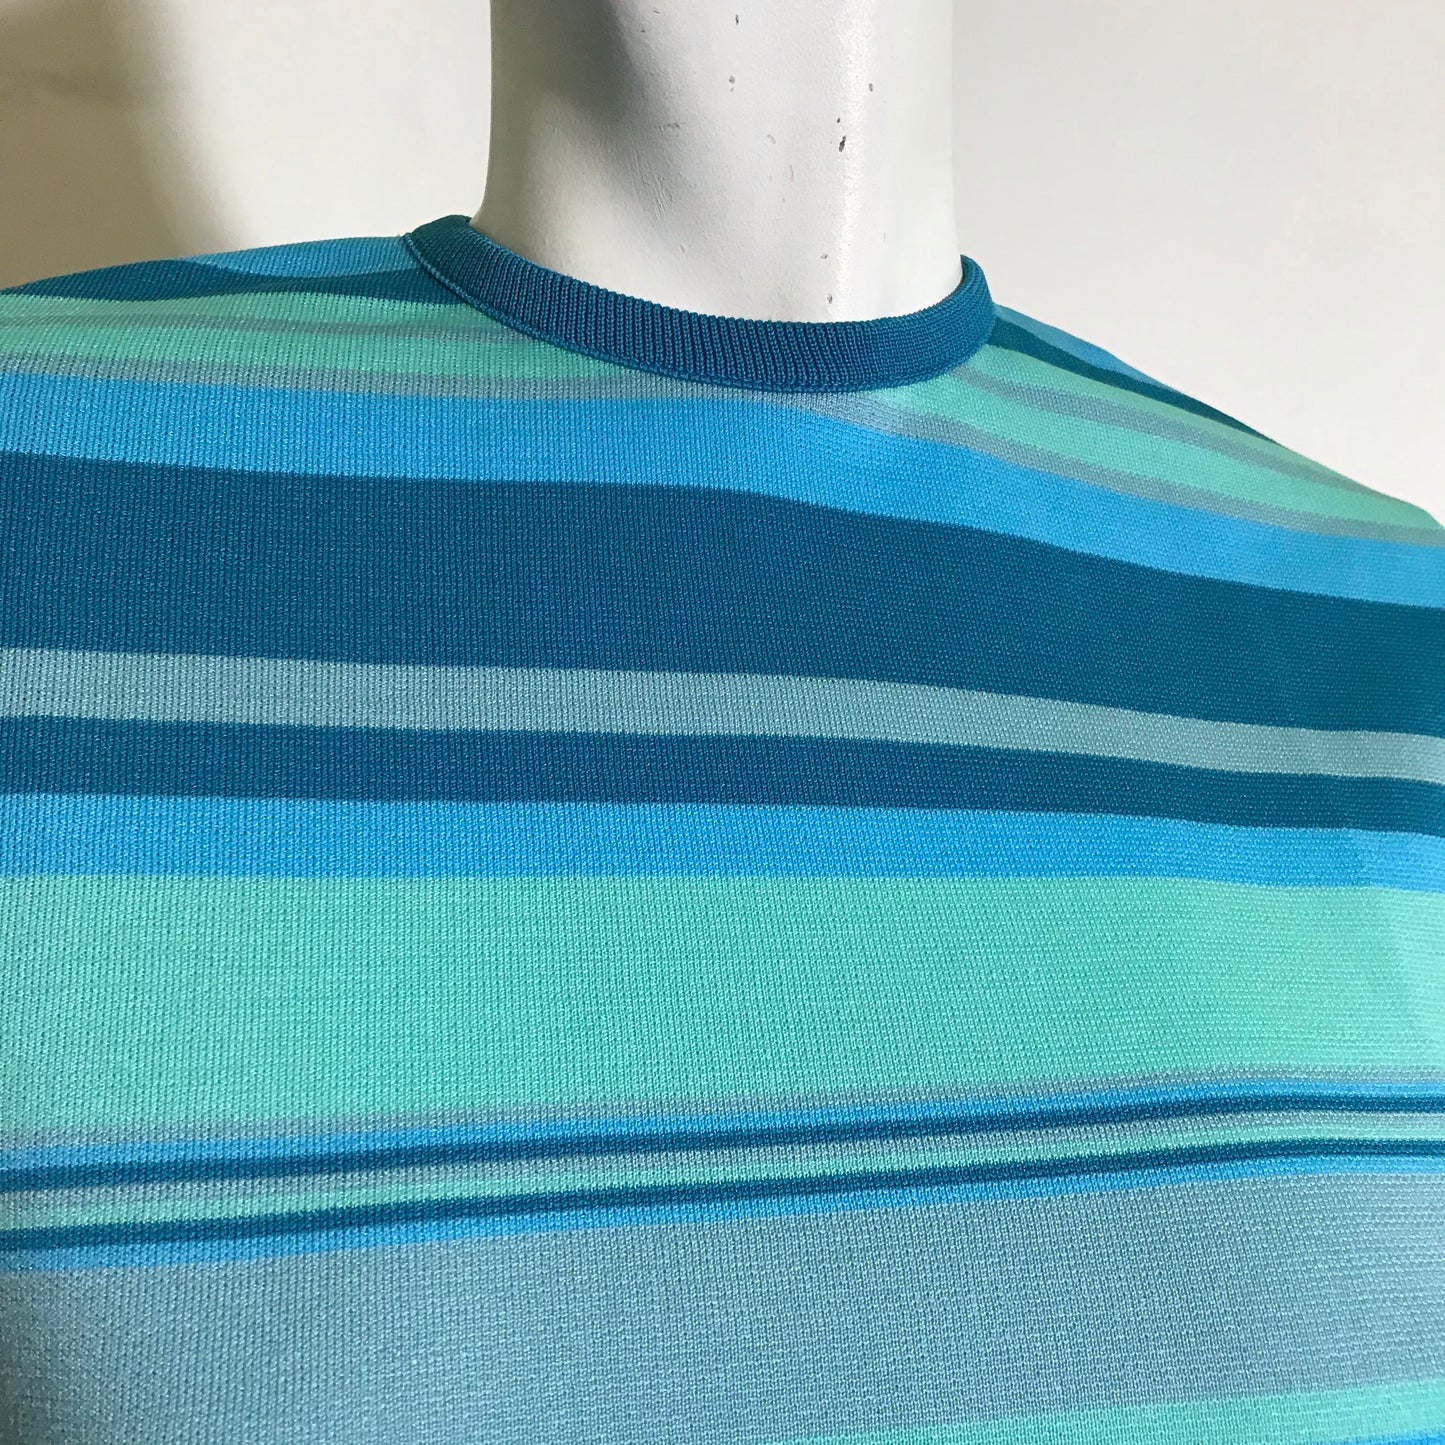 Shade of Blue Striped Poly Top circa 1970s